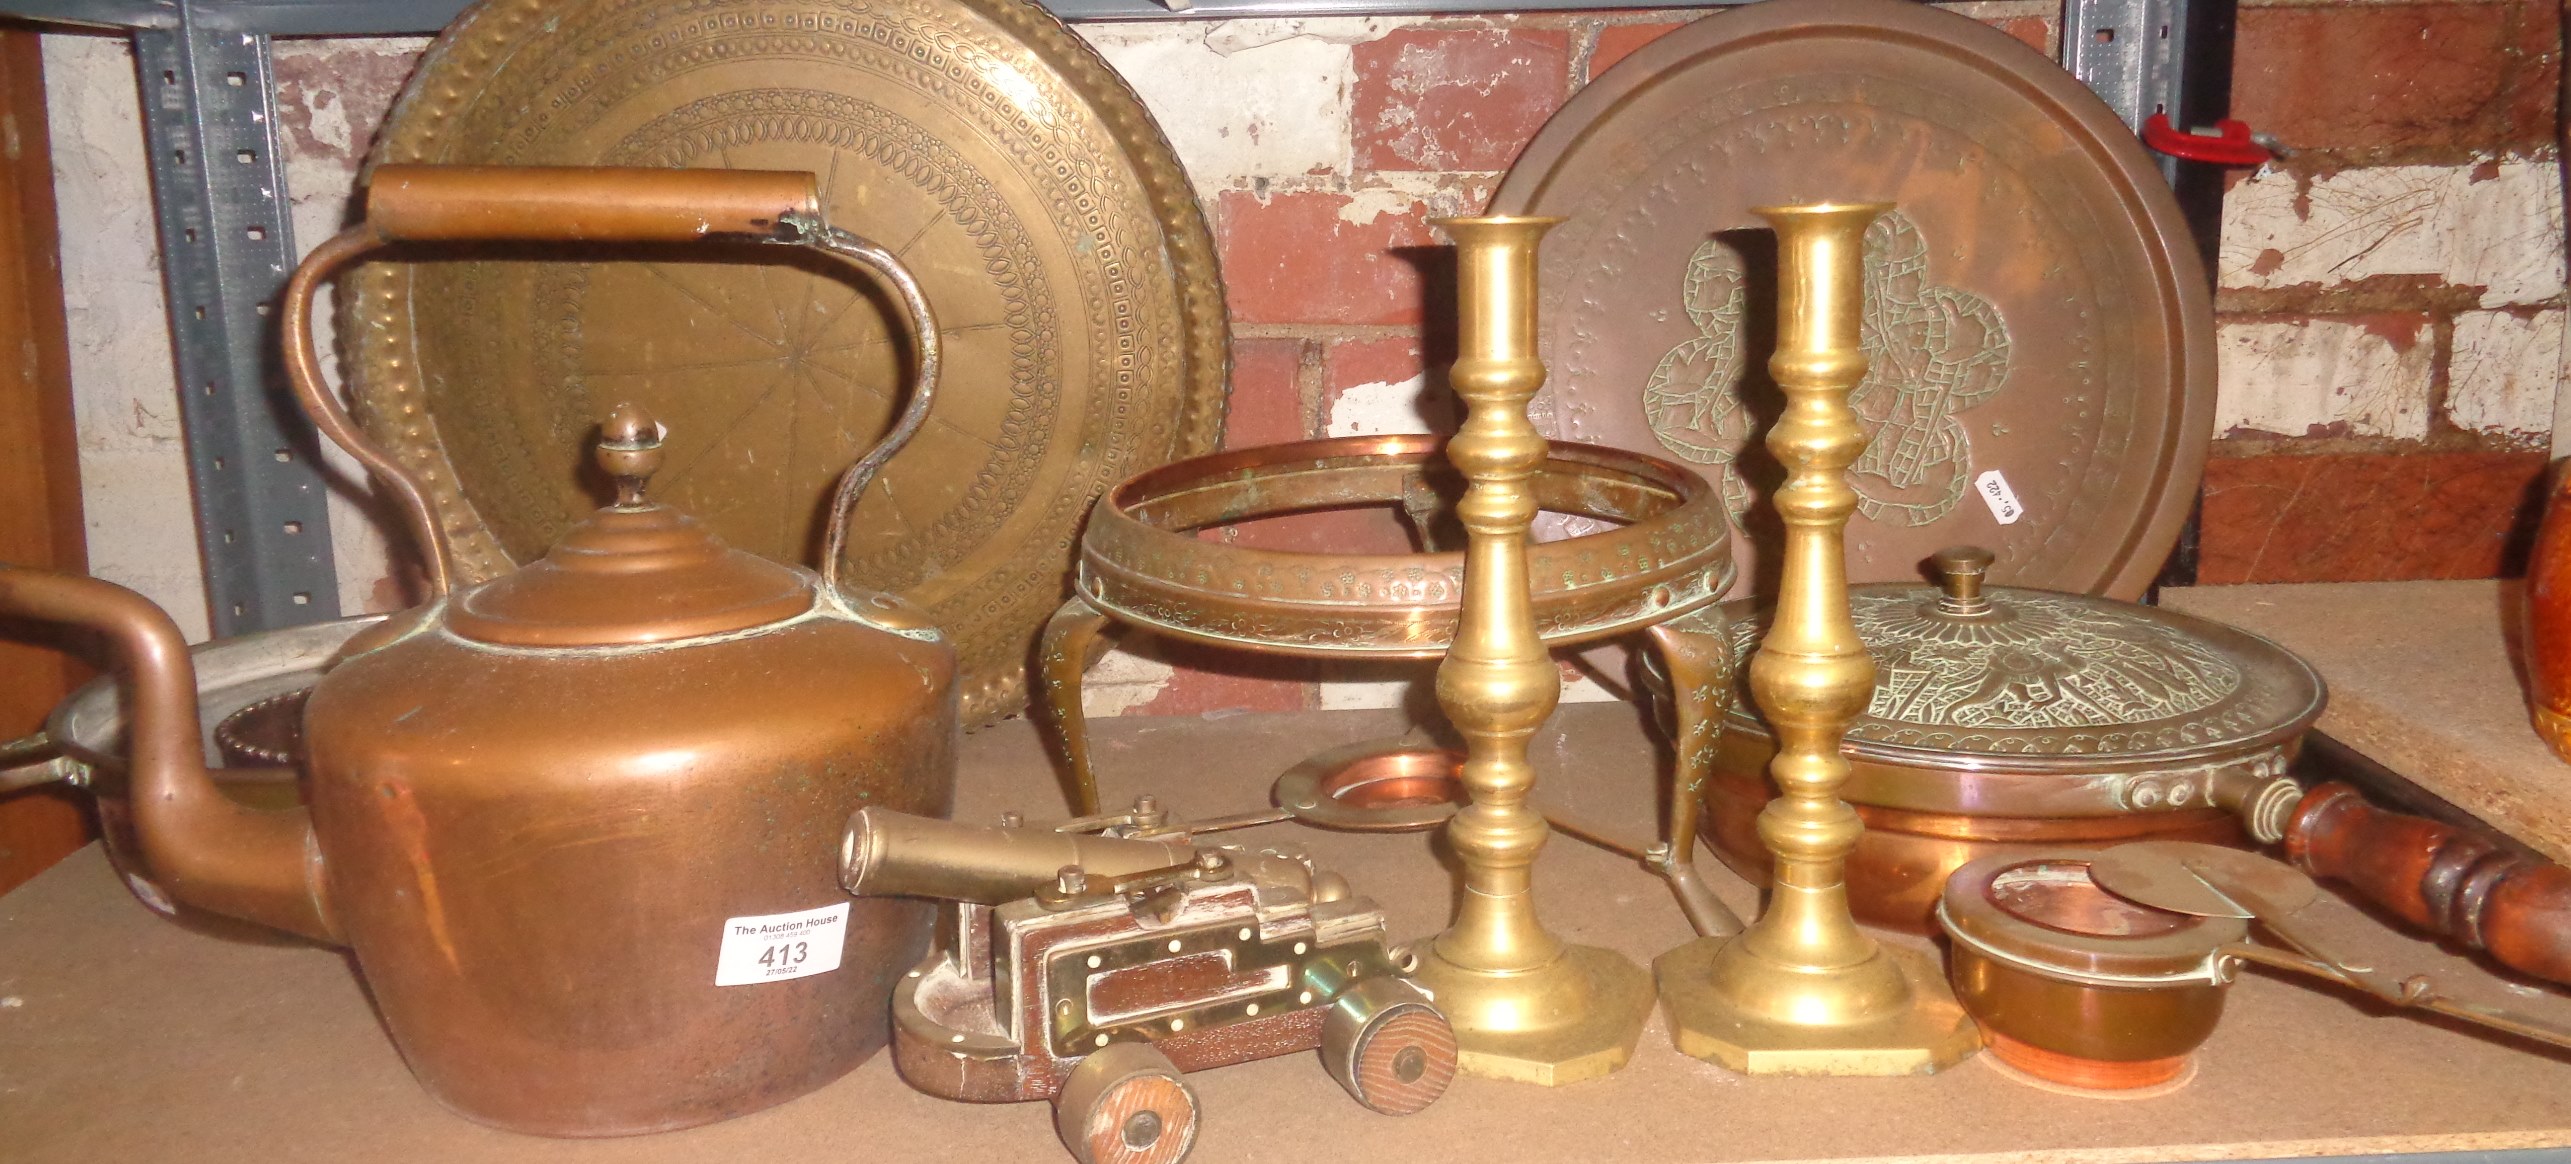 Victorian copper kettle, brass and wood model of a cannon and other copper and brassware